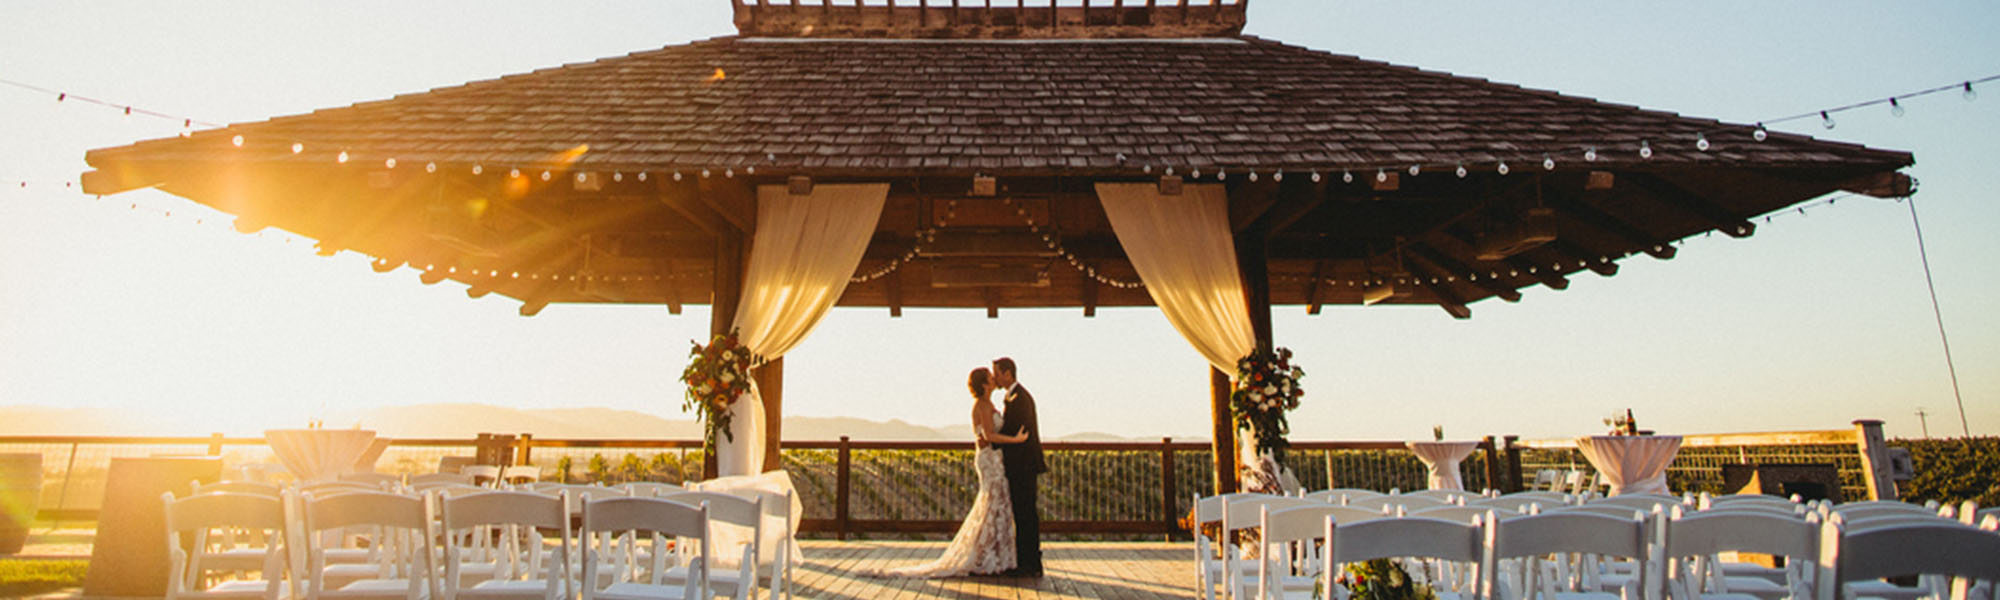 Paso Robles Winery Private Events & Weddings